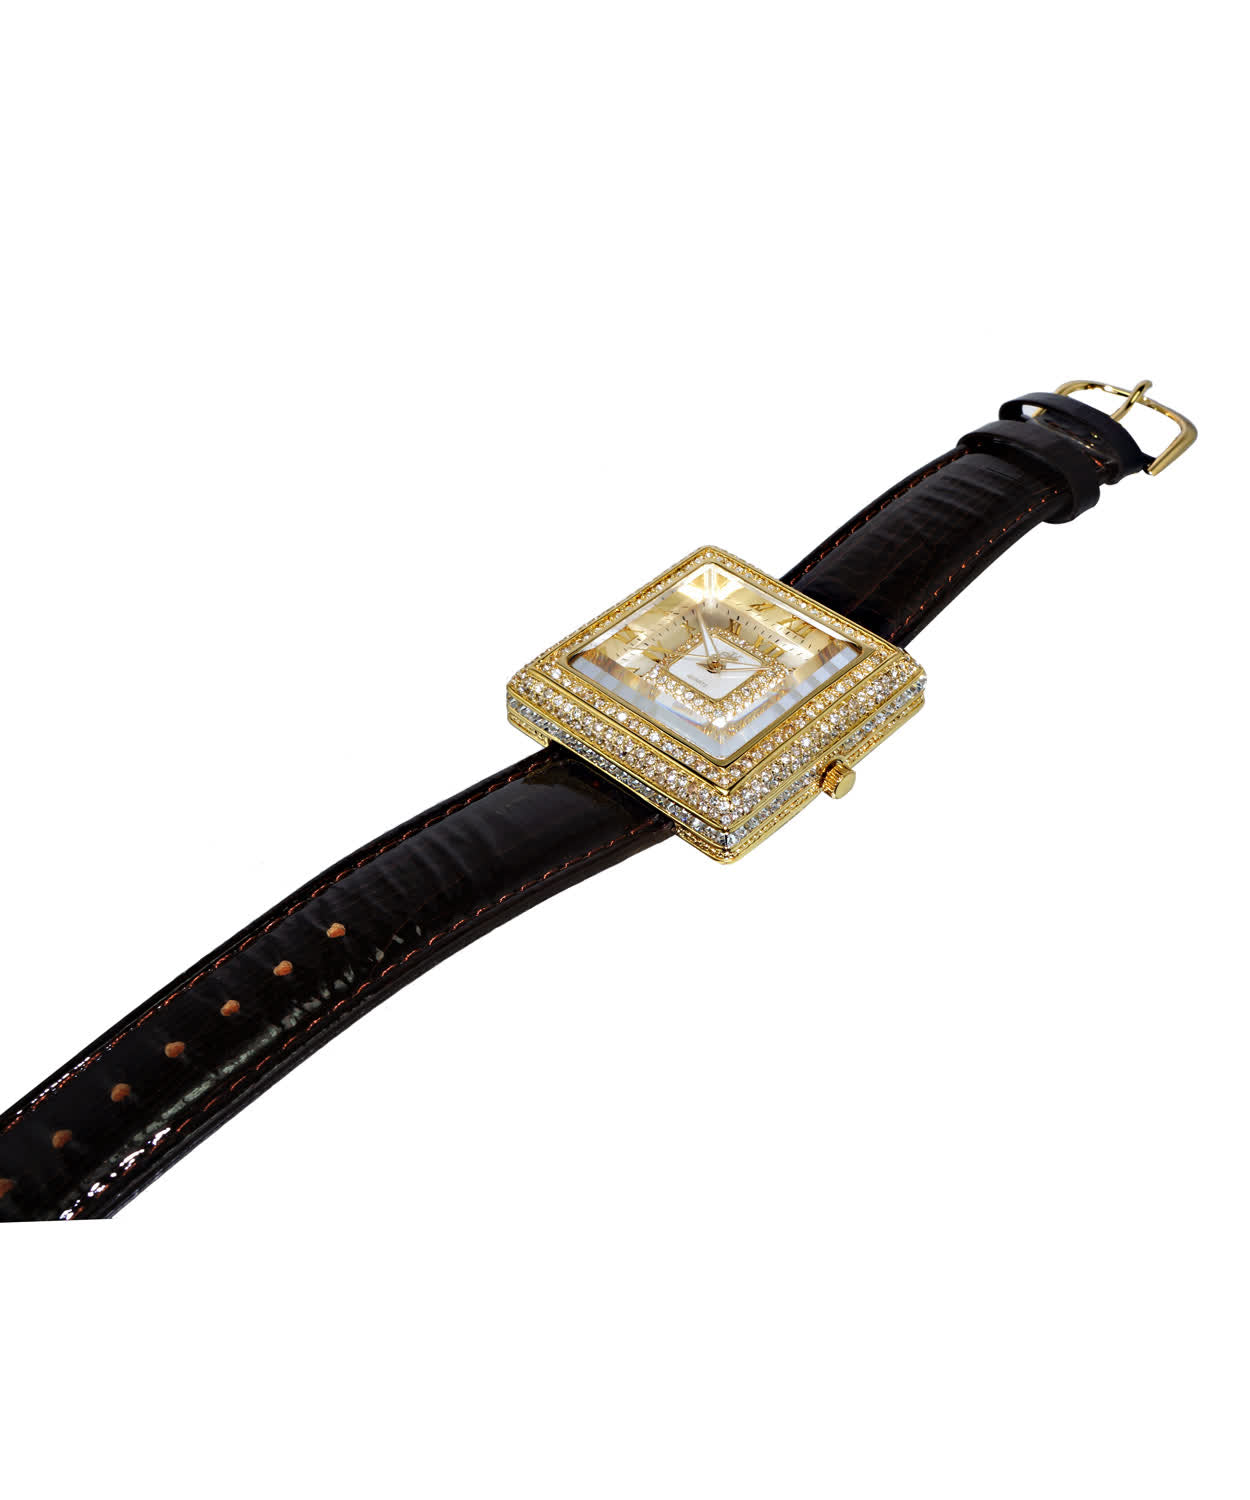 Adee Kaye Quad Collection Model Ak25-Lg Watch With White Crystal - Japanese Quartz Movement View 2